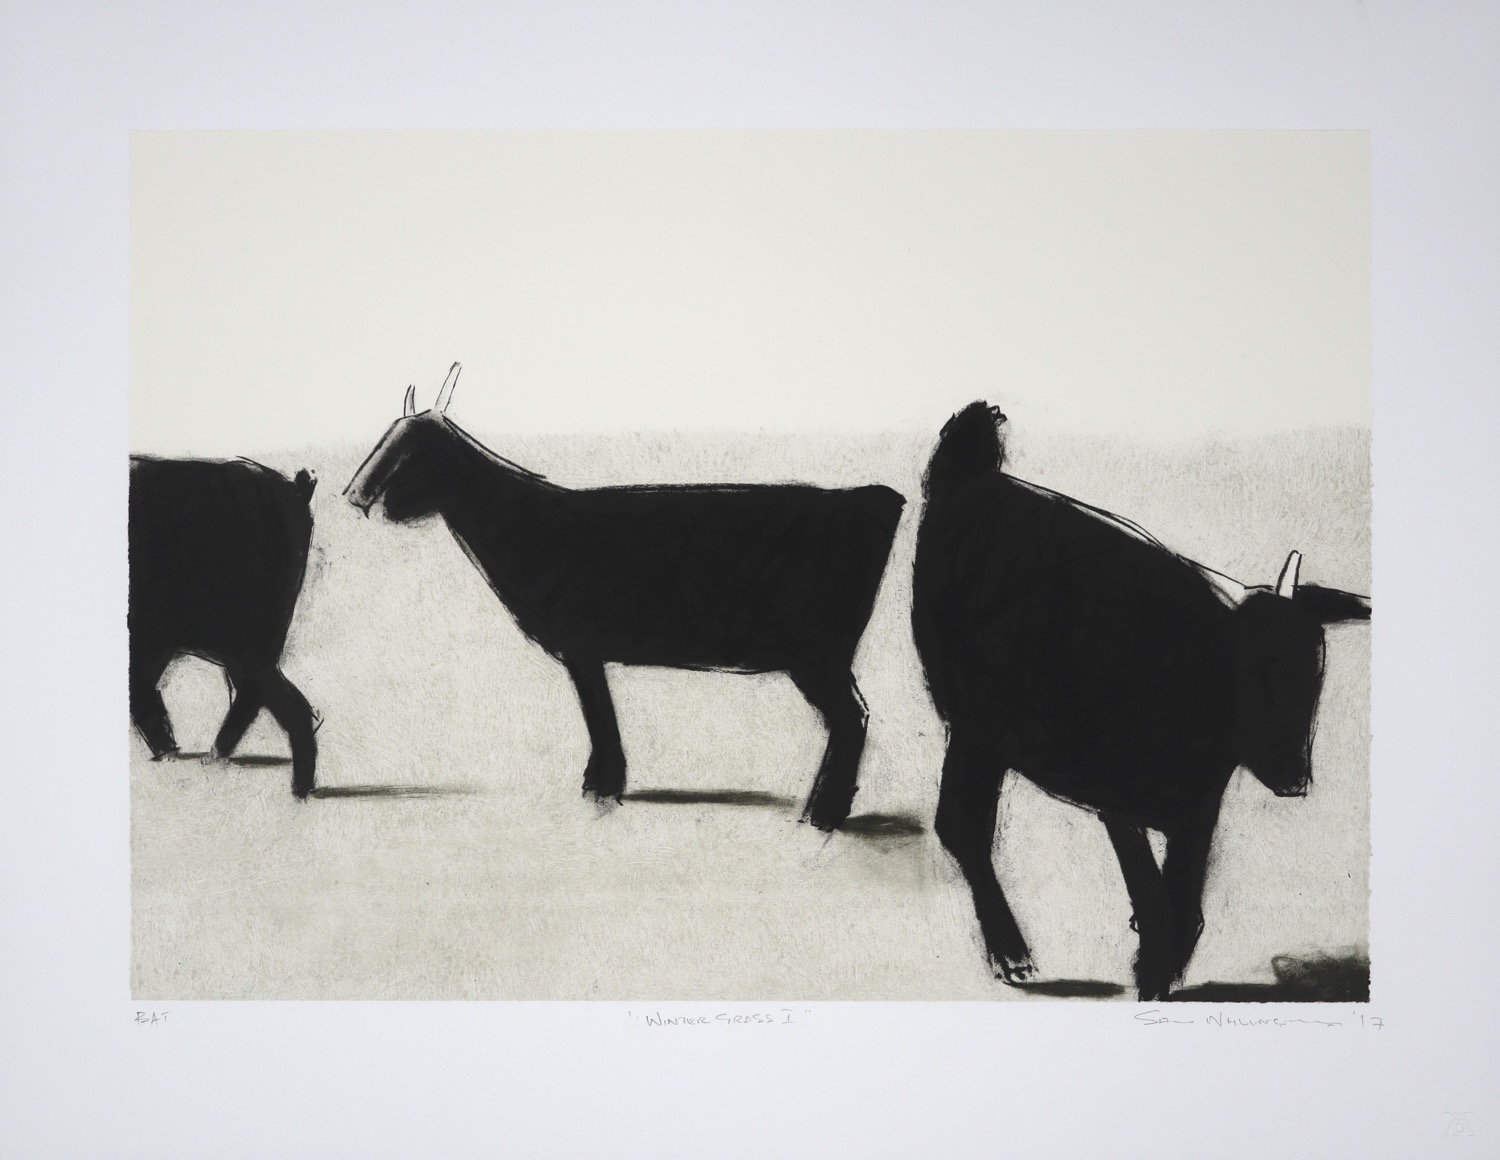 Three goats drawn in charcoal and simplifed to elegant forms set in bare landscape